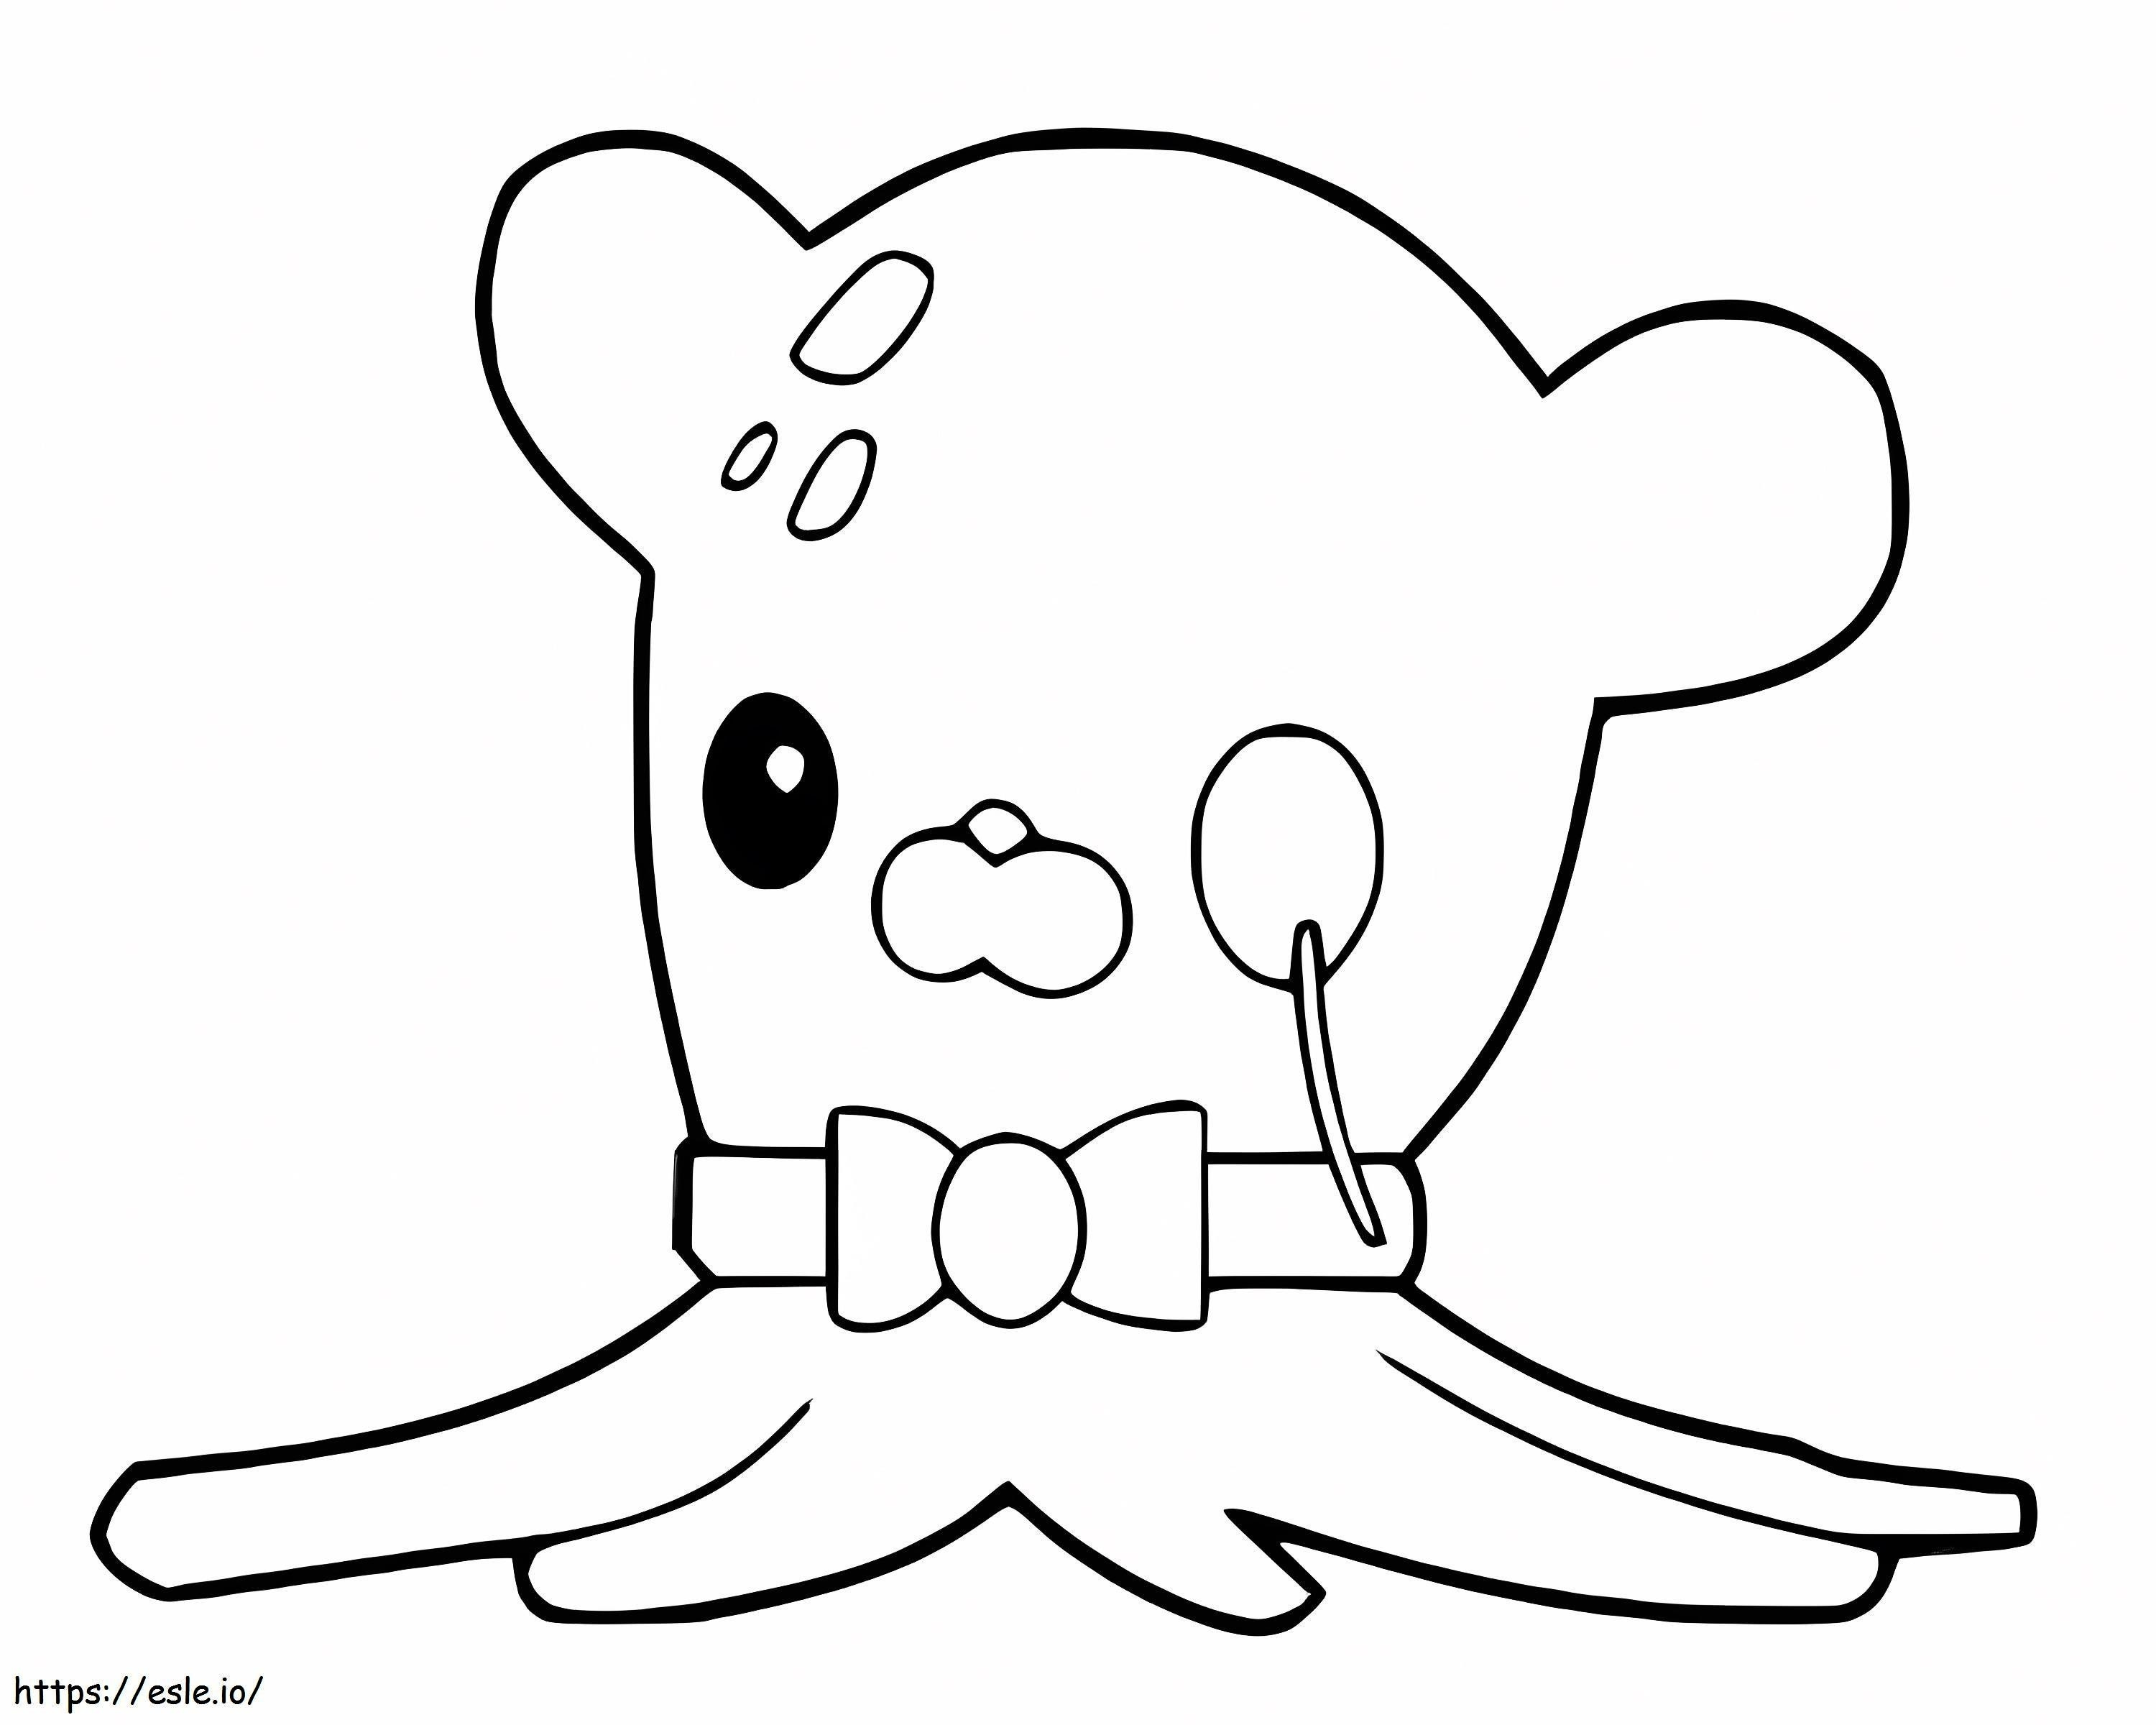 Professor Inkling Octonauts 2 coloring page